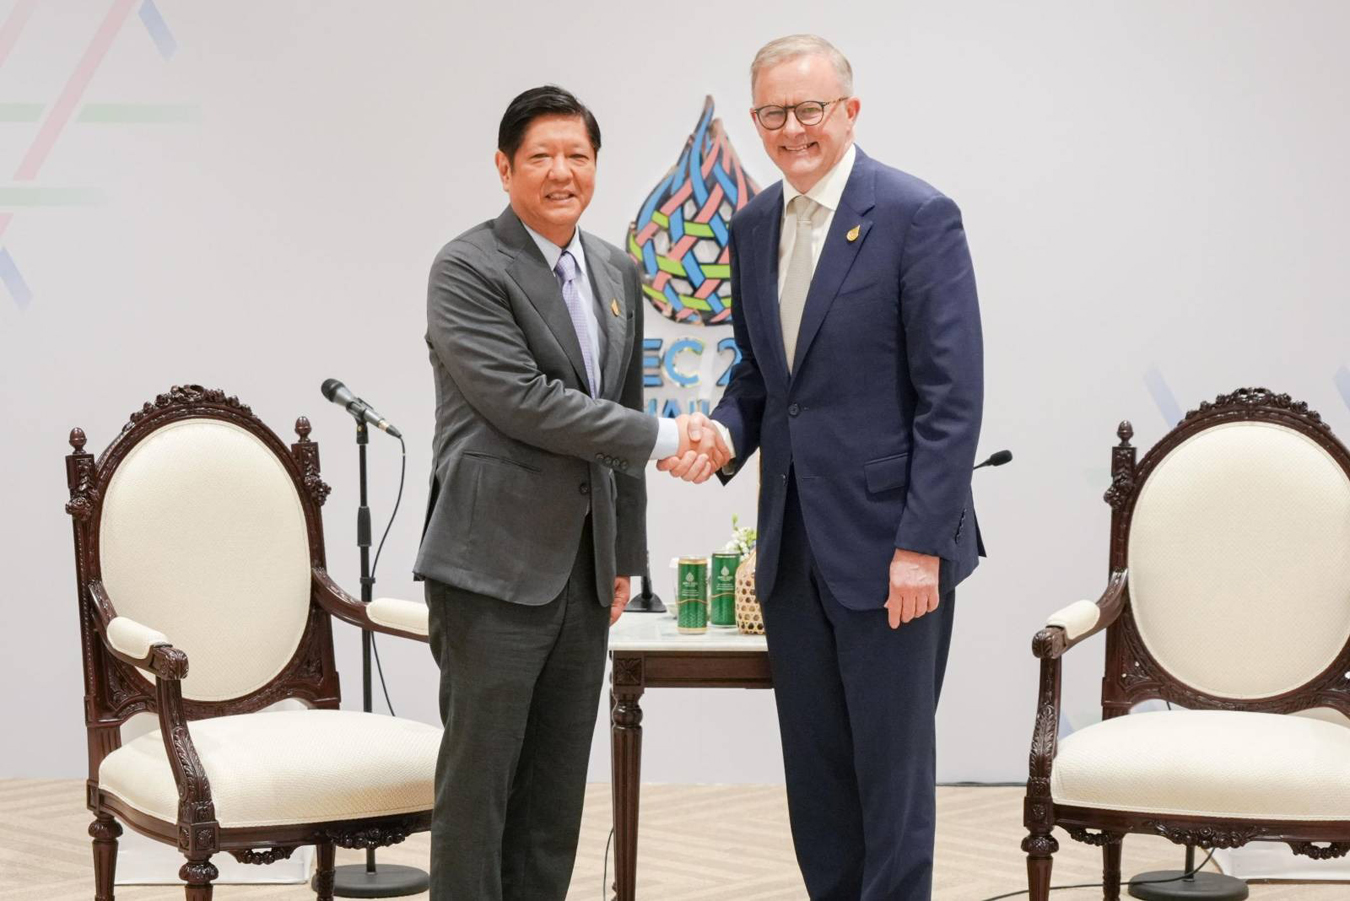 Australia Prime Minister Anthony Albanese on Saturday lauded the Philippines and Australia's good economic and people-to-people relations in his historic meeting with President Ferdinand R. Marcos Jr. in Bangkok.